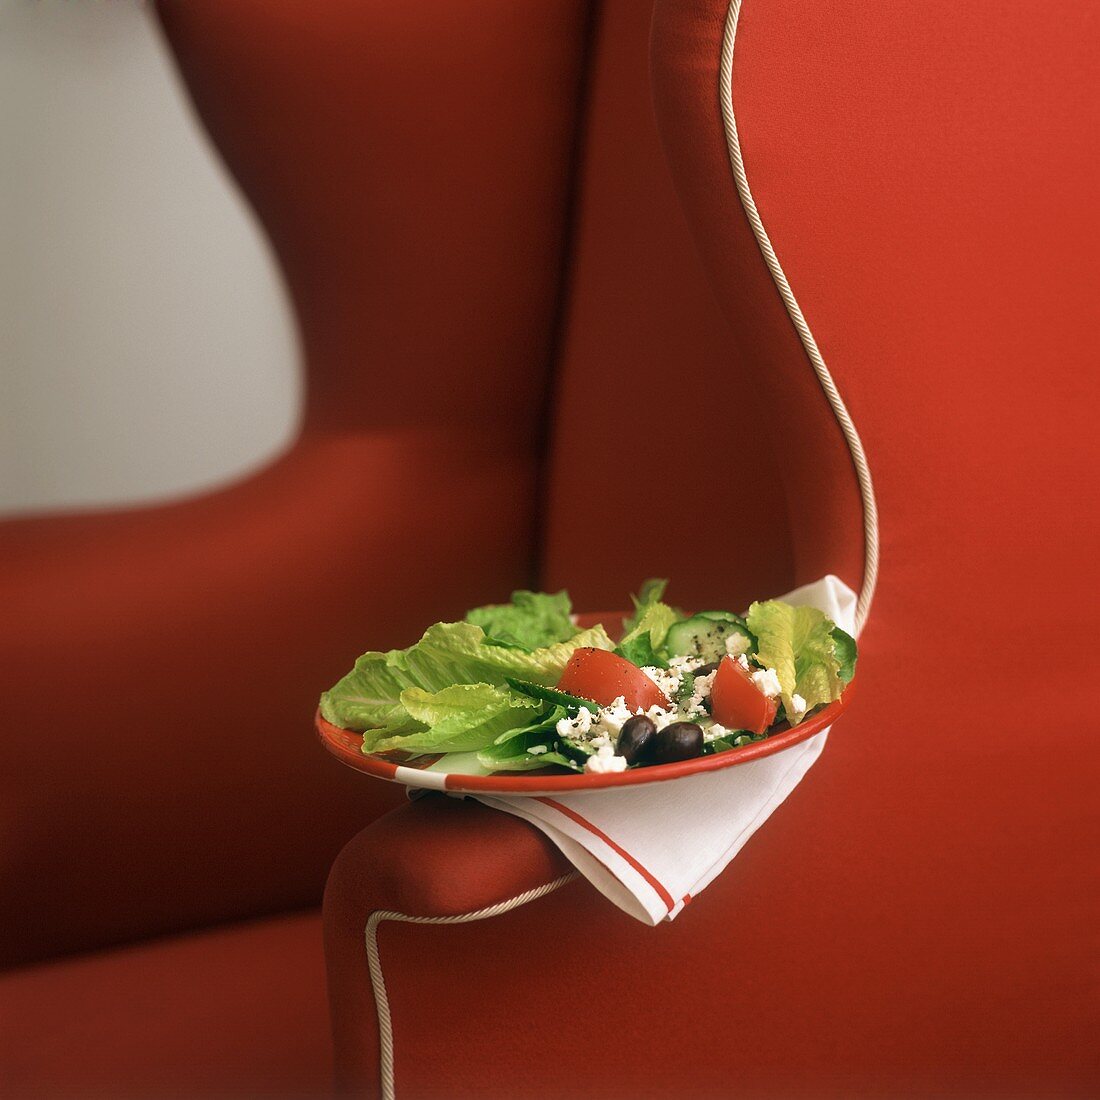 A Greek Salad on a Red Chair